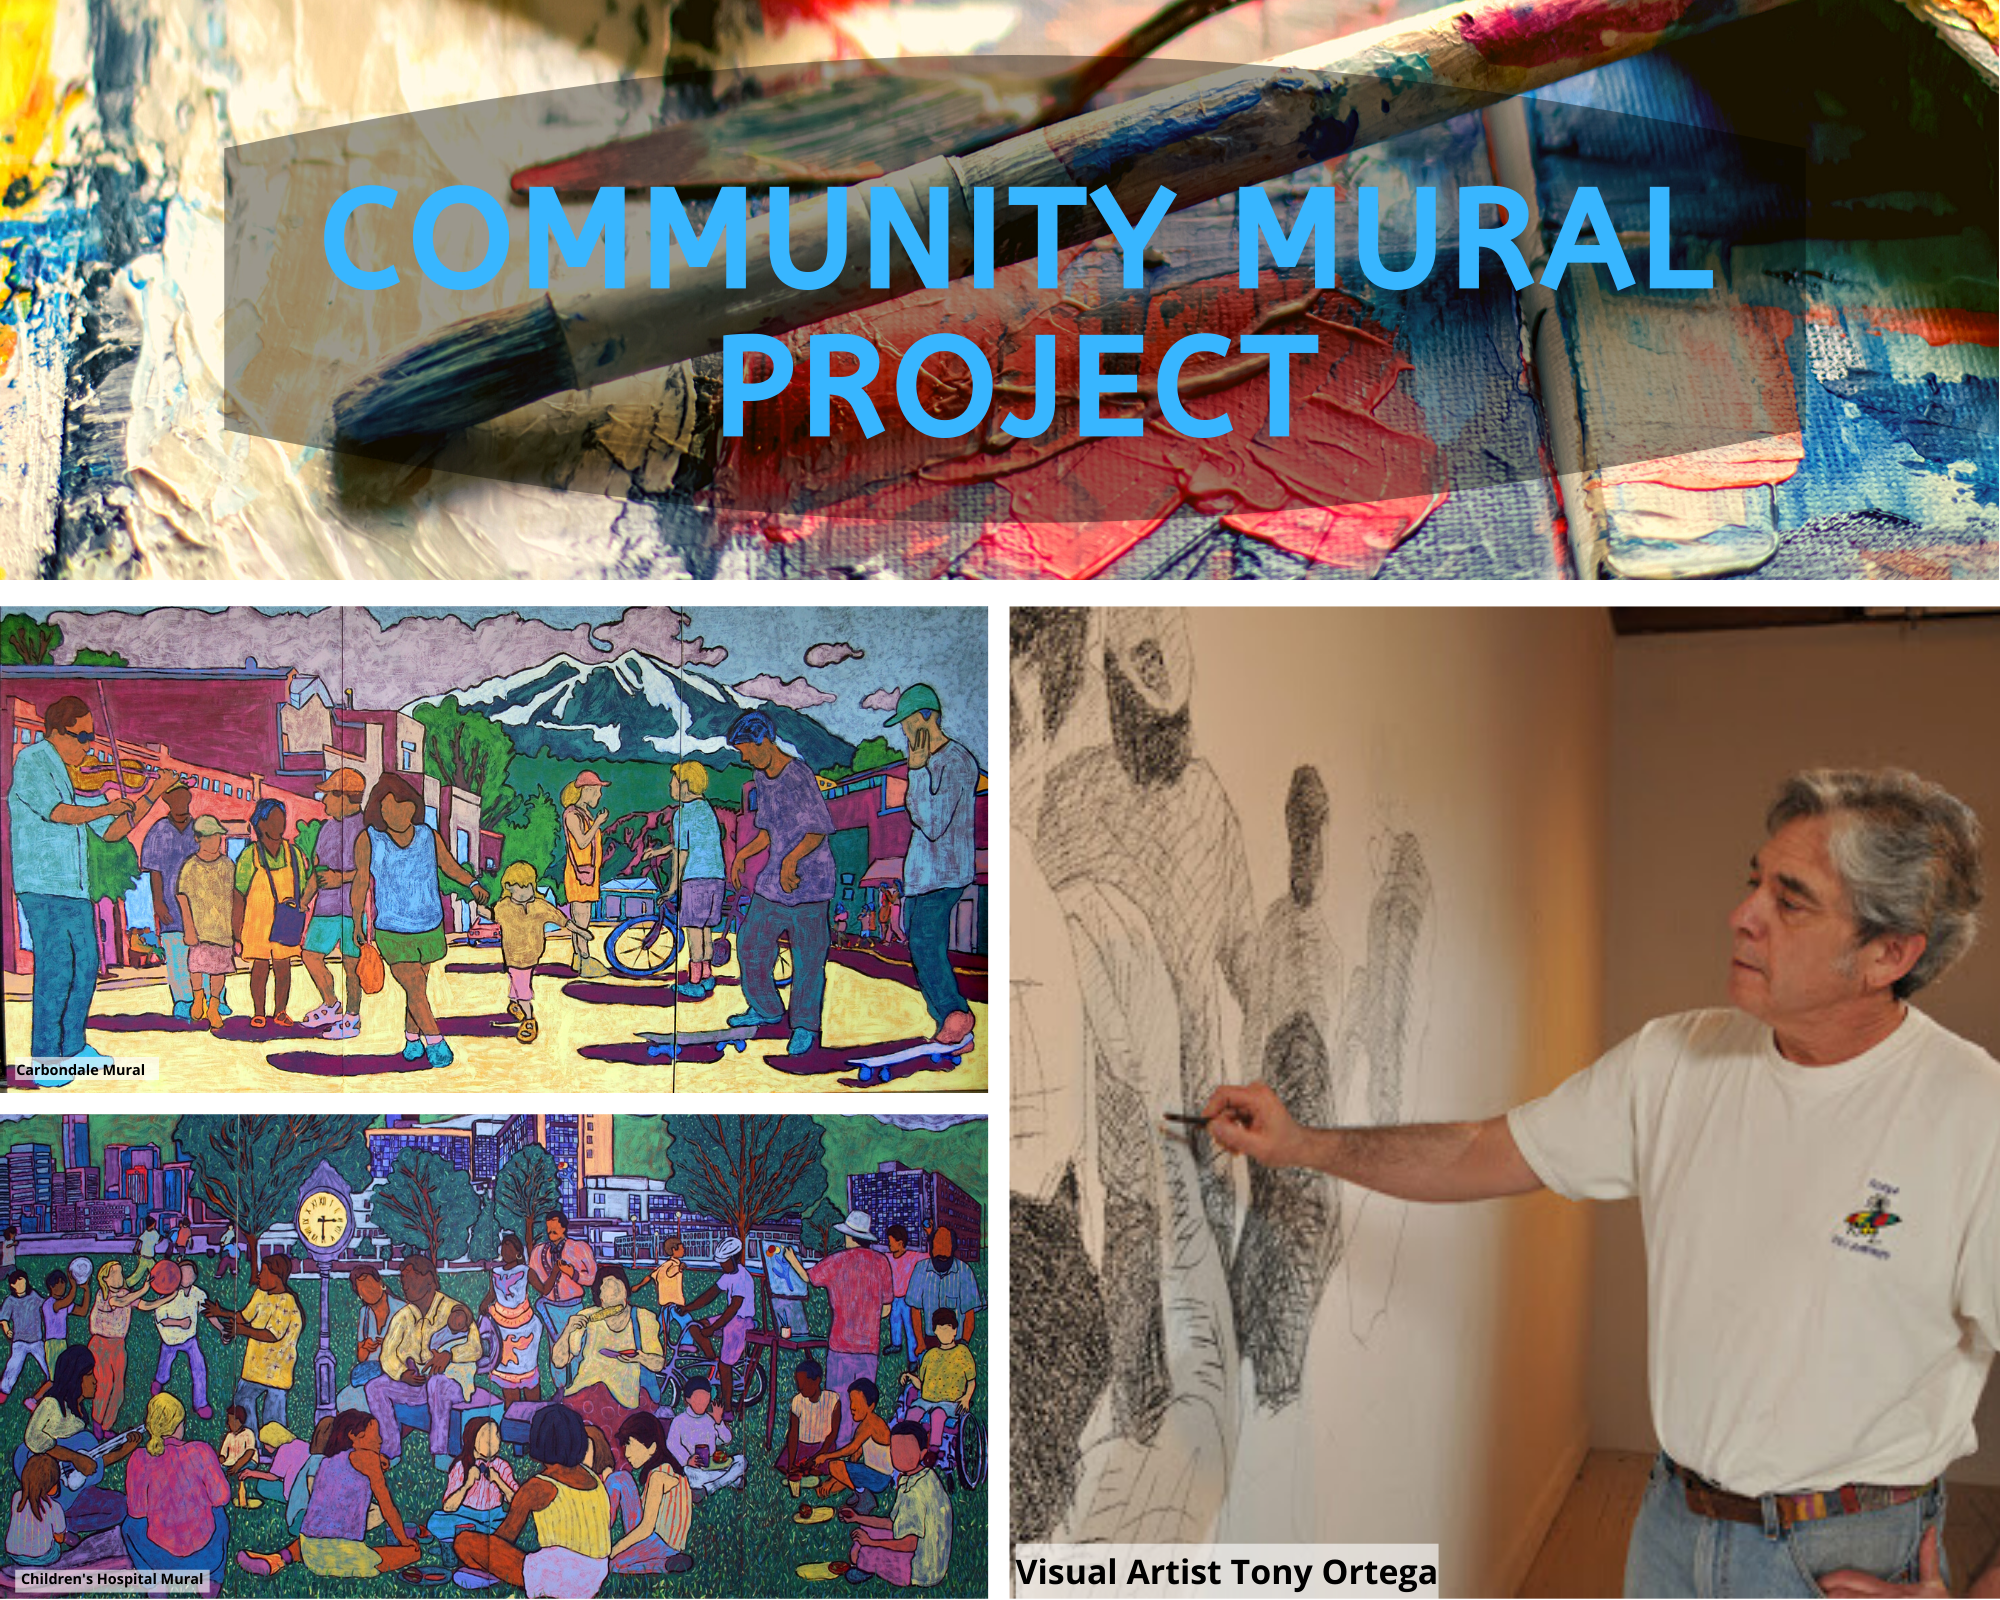 Community Mural Project